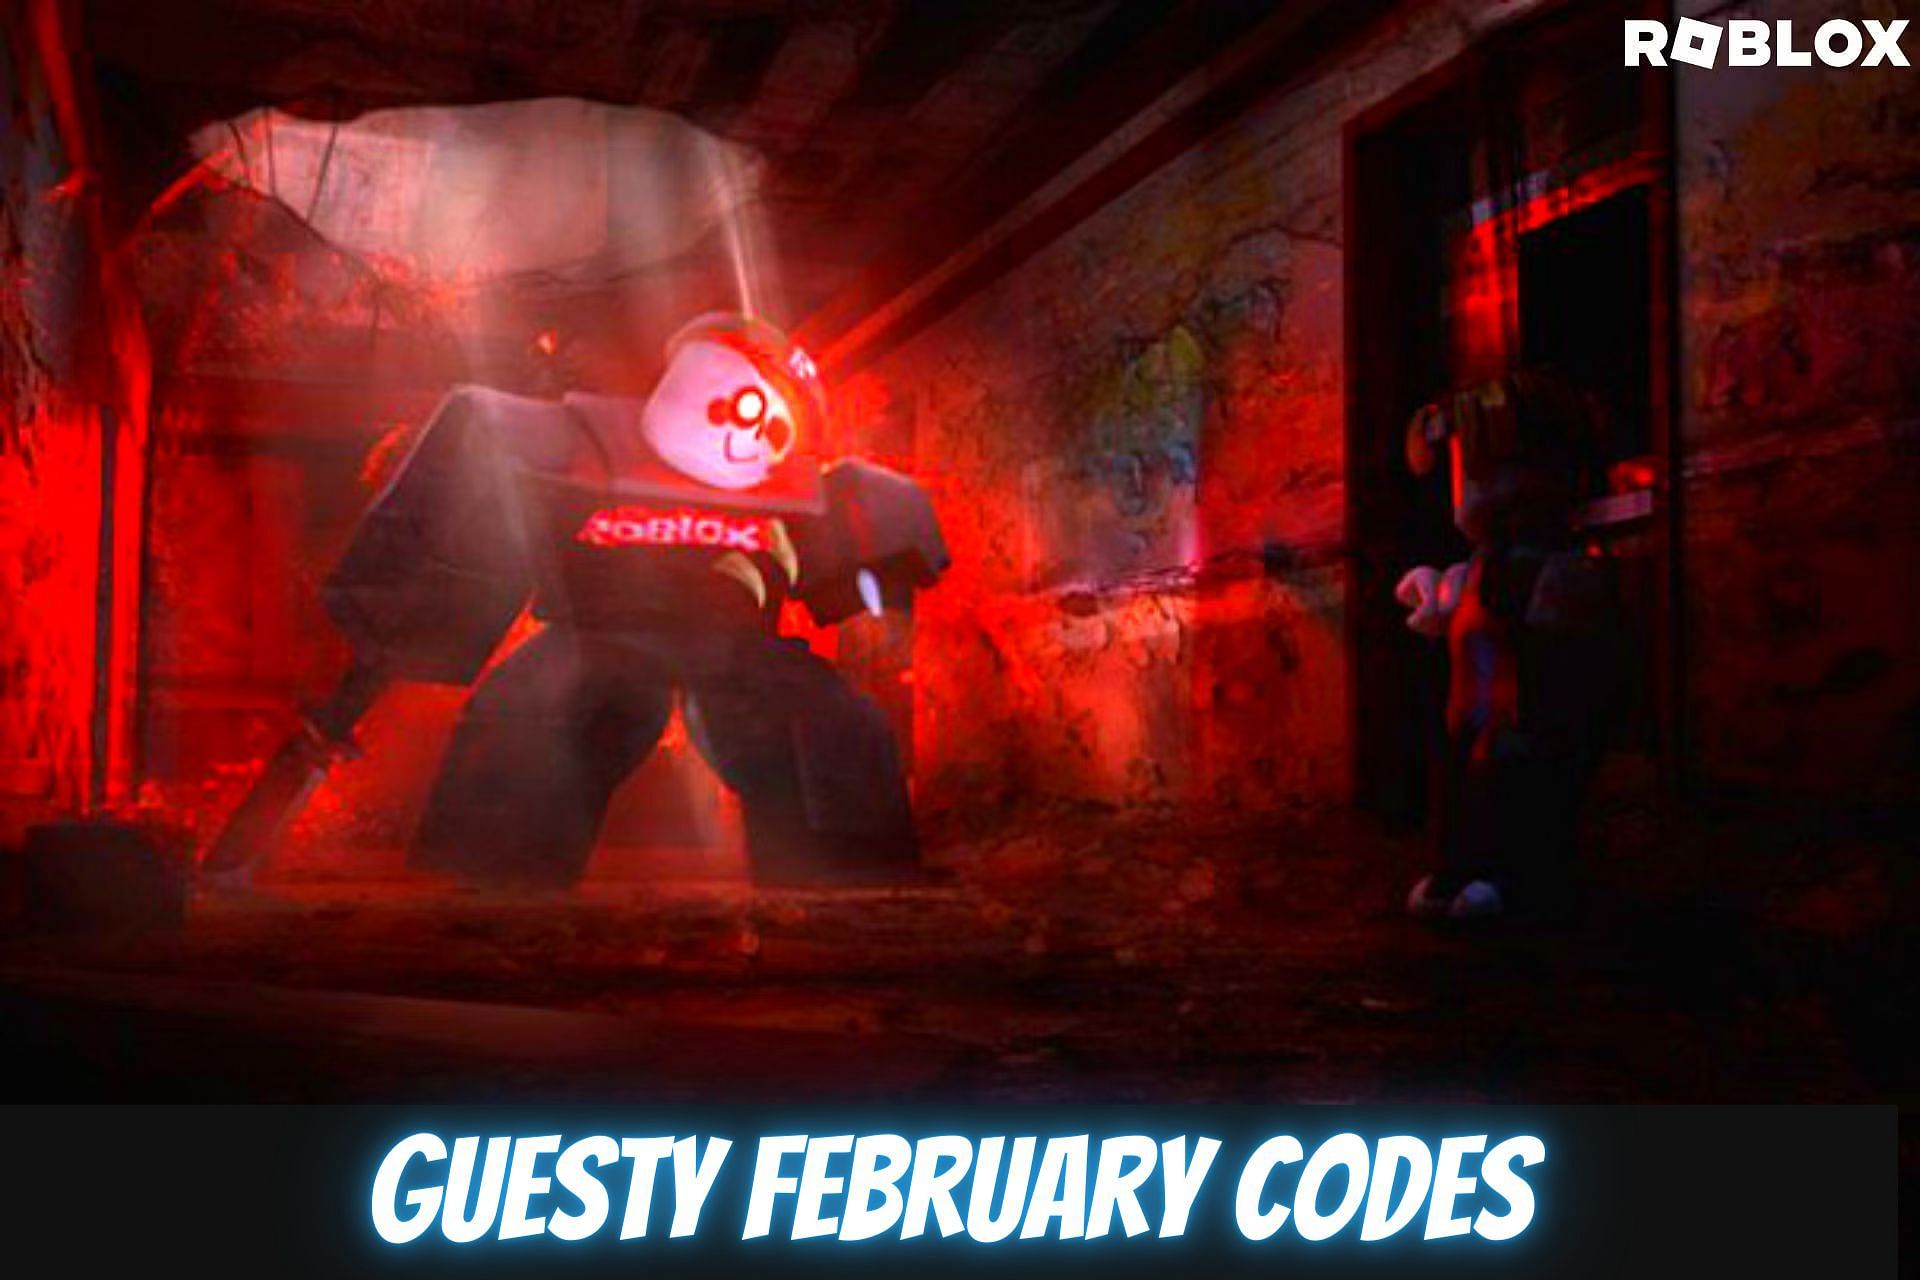 Roblox Guesty February codes